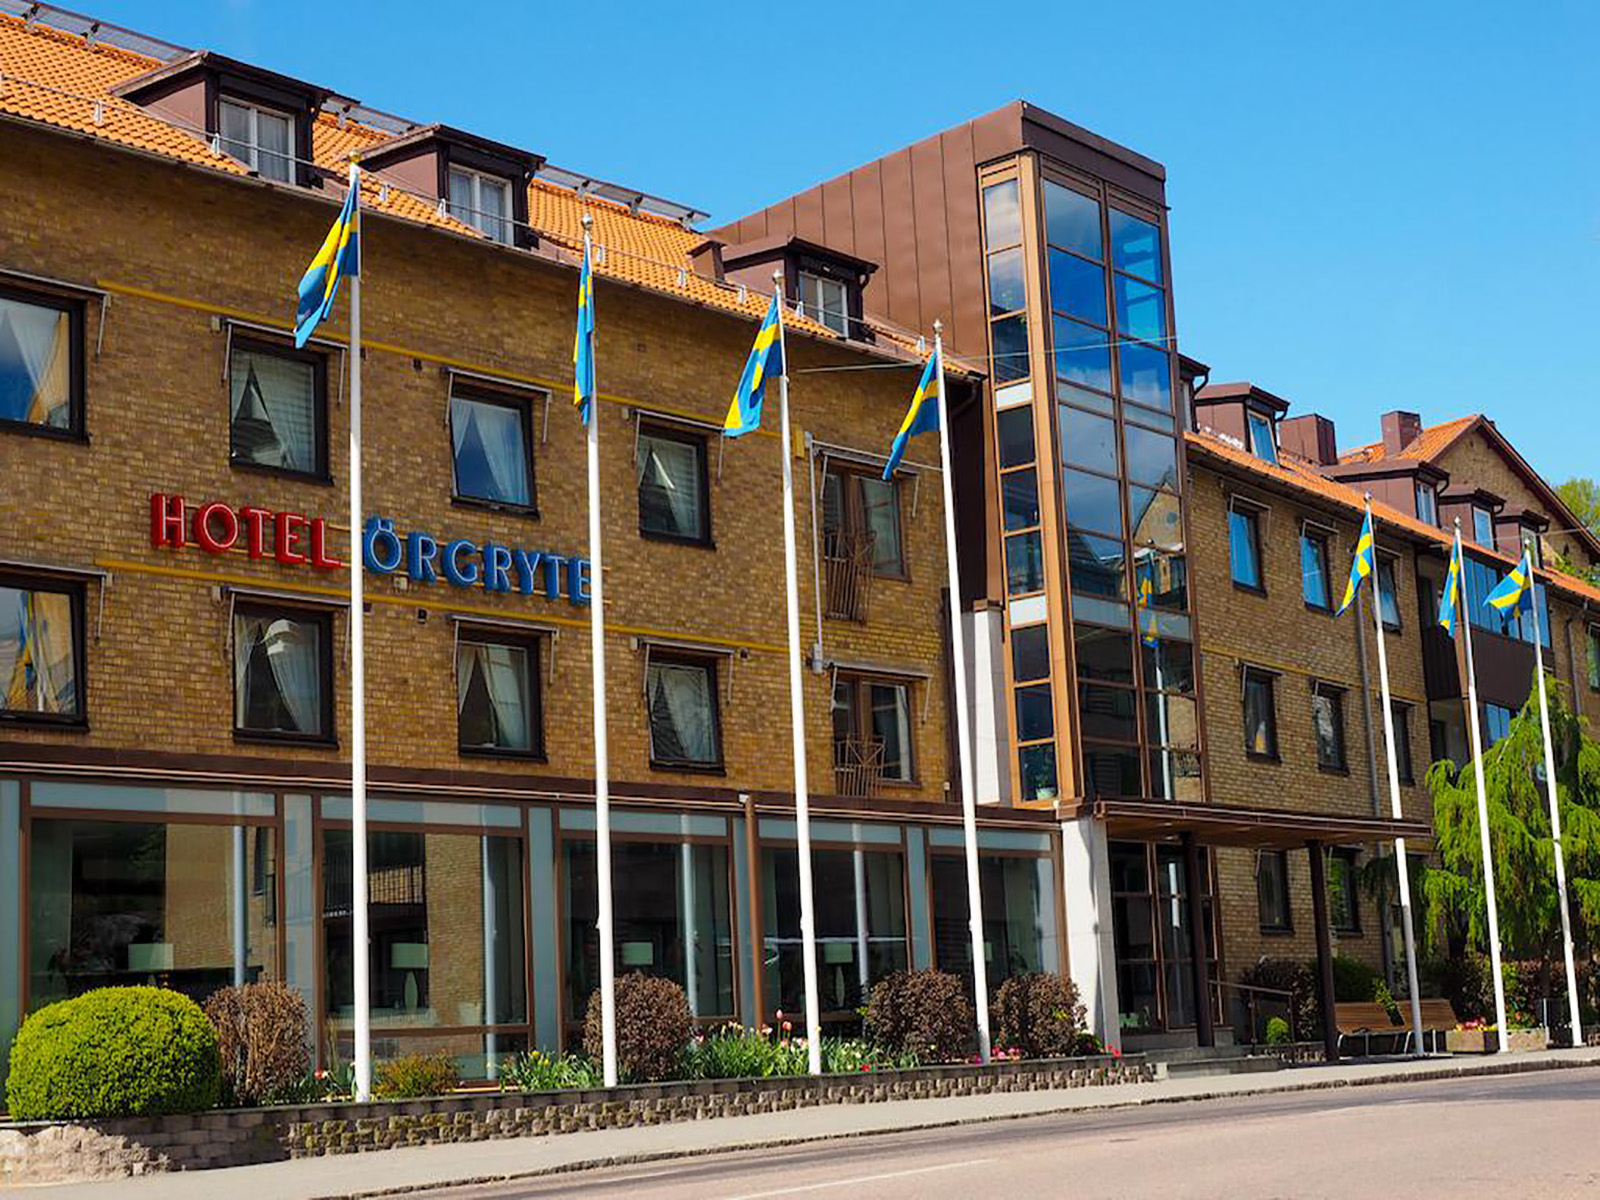 Hotel Örgryte <br/>57.65 ew <br/> <a href='http://vakantieoplossing.nl/outpage/?id=76cc29aed2badf068835b47a7a6d4446' target='_blank'>View Details</a>